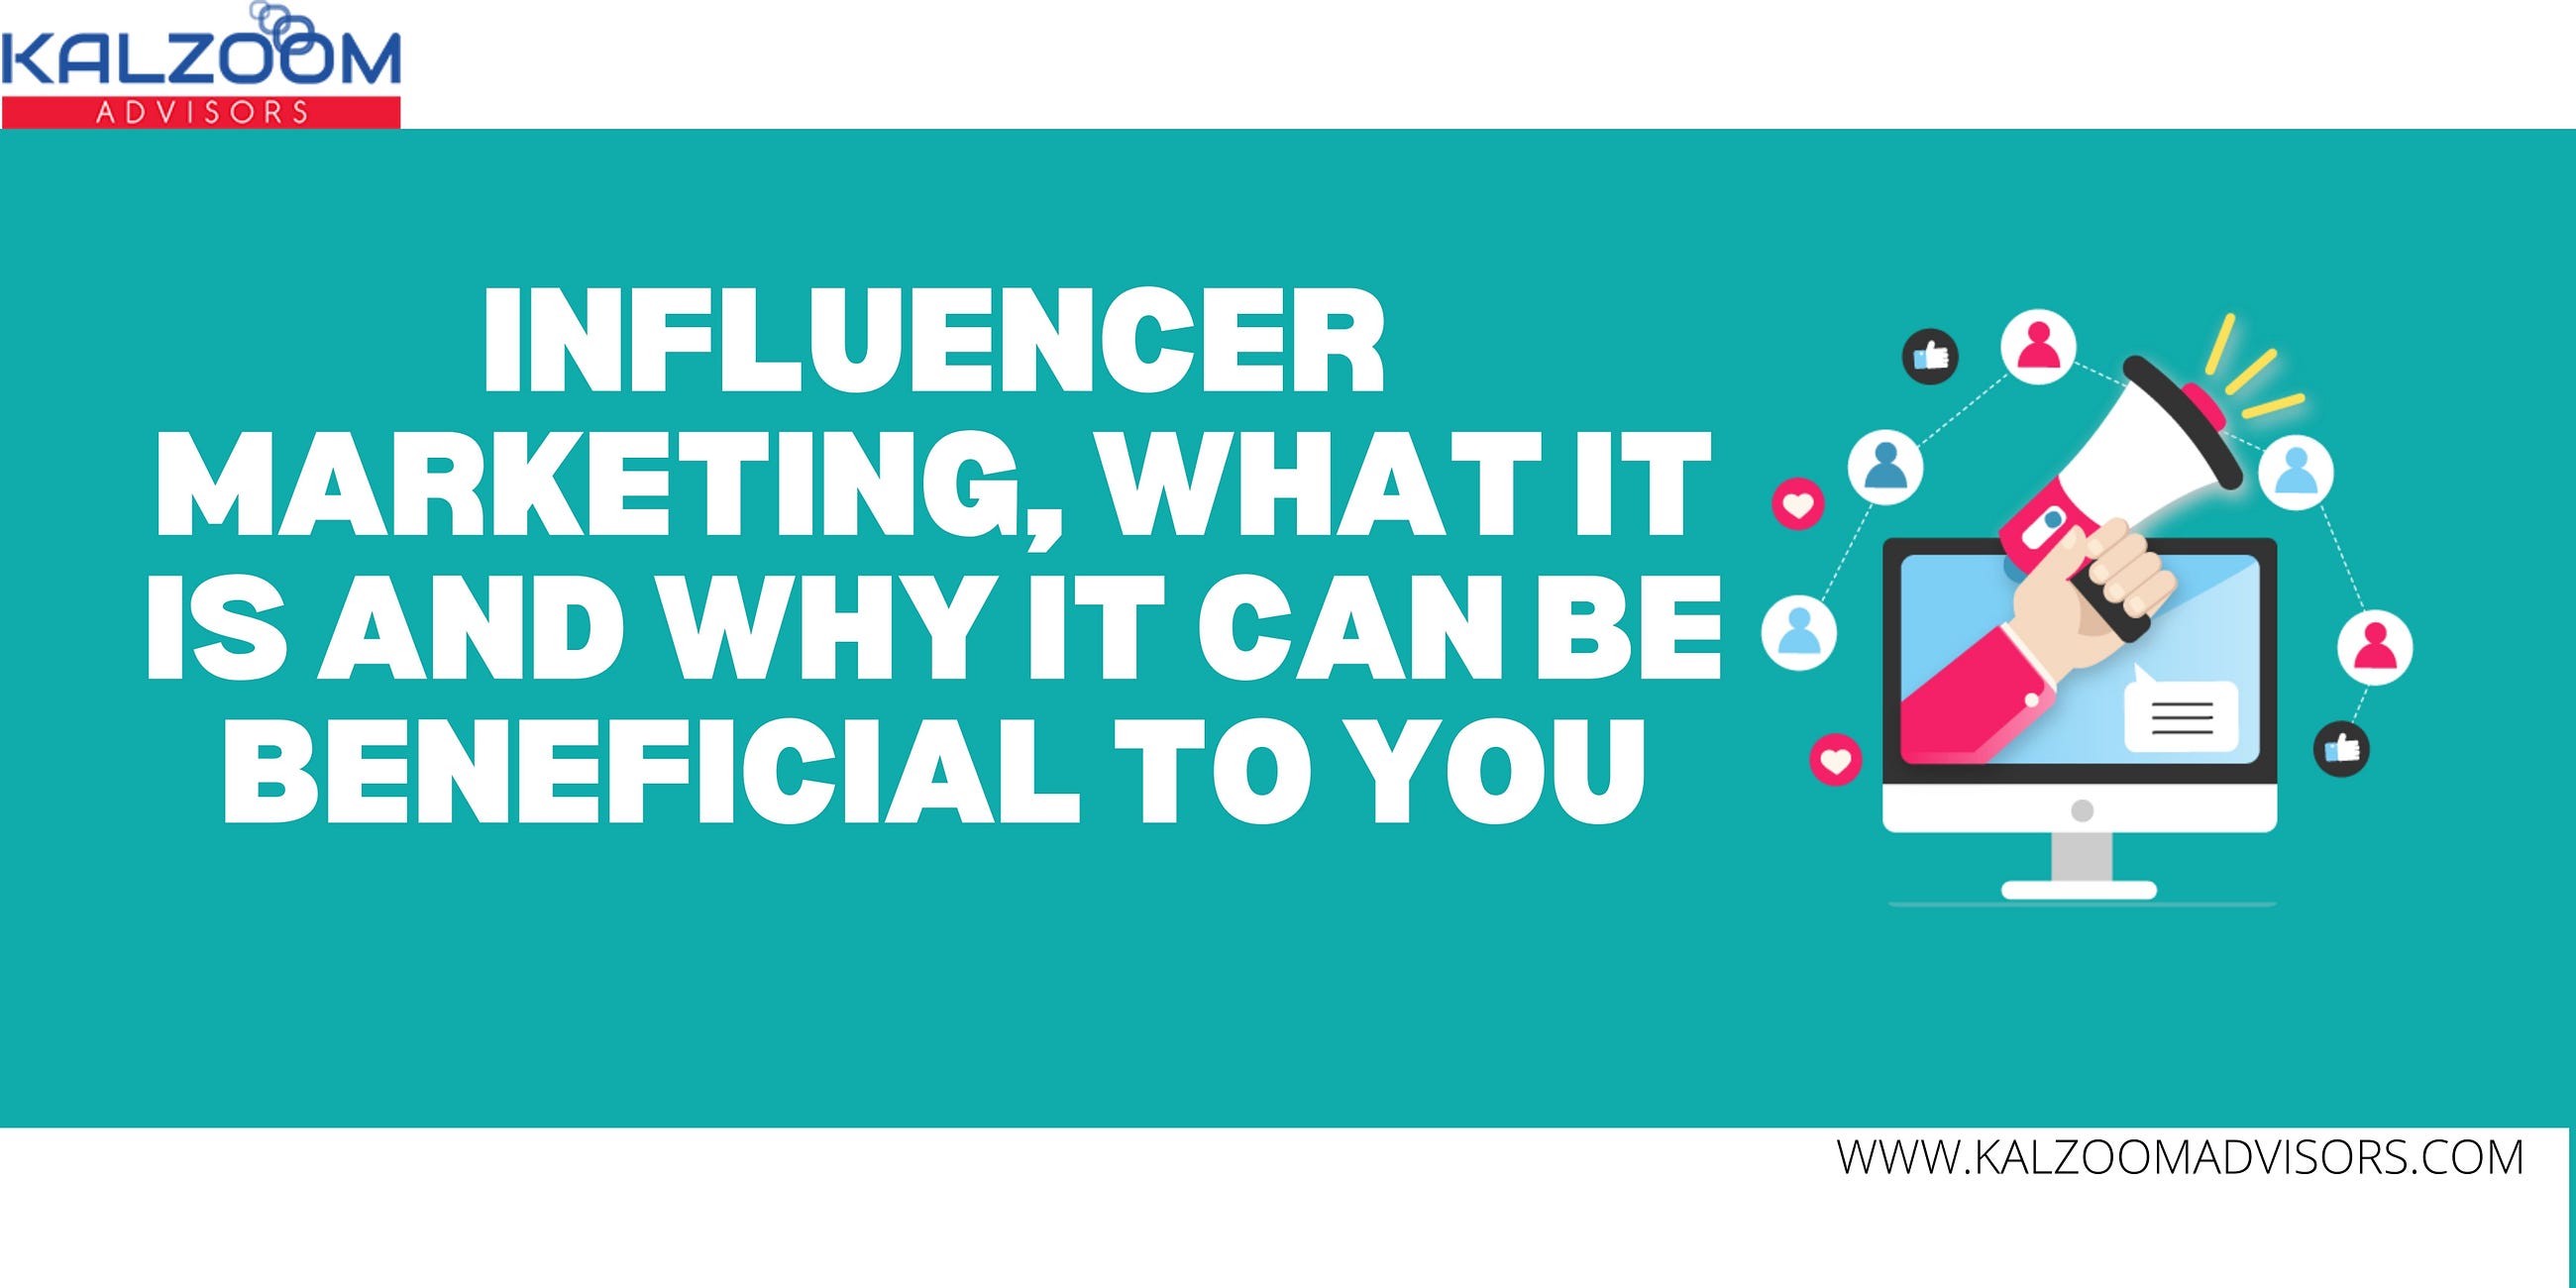 Influencer Marketing, What It is and why it can be Beneficial to You